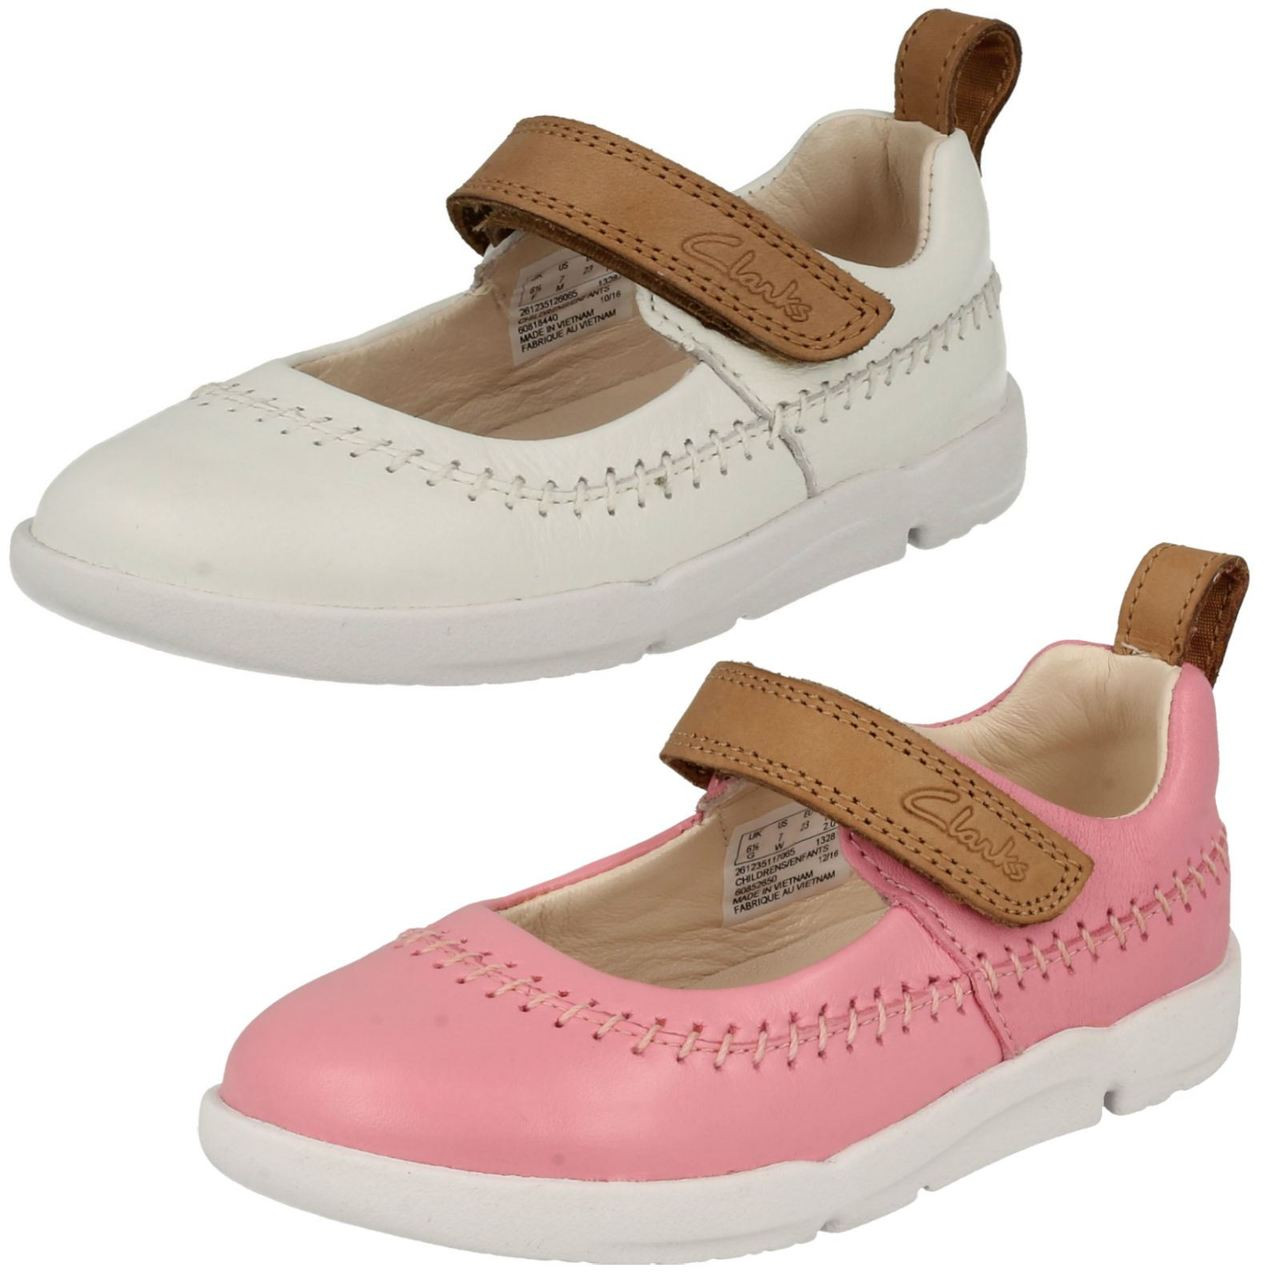 clarks baby girl walking shoes